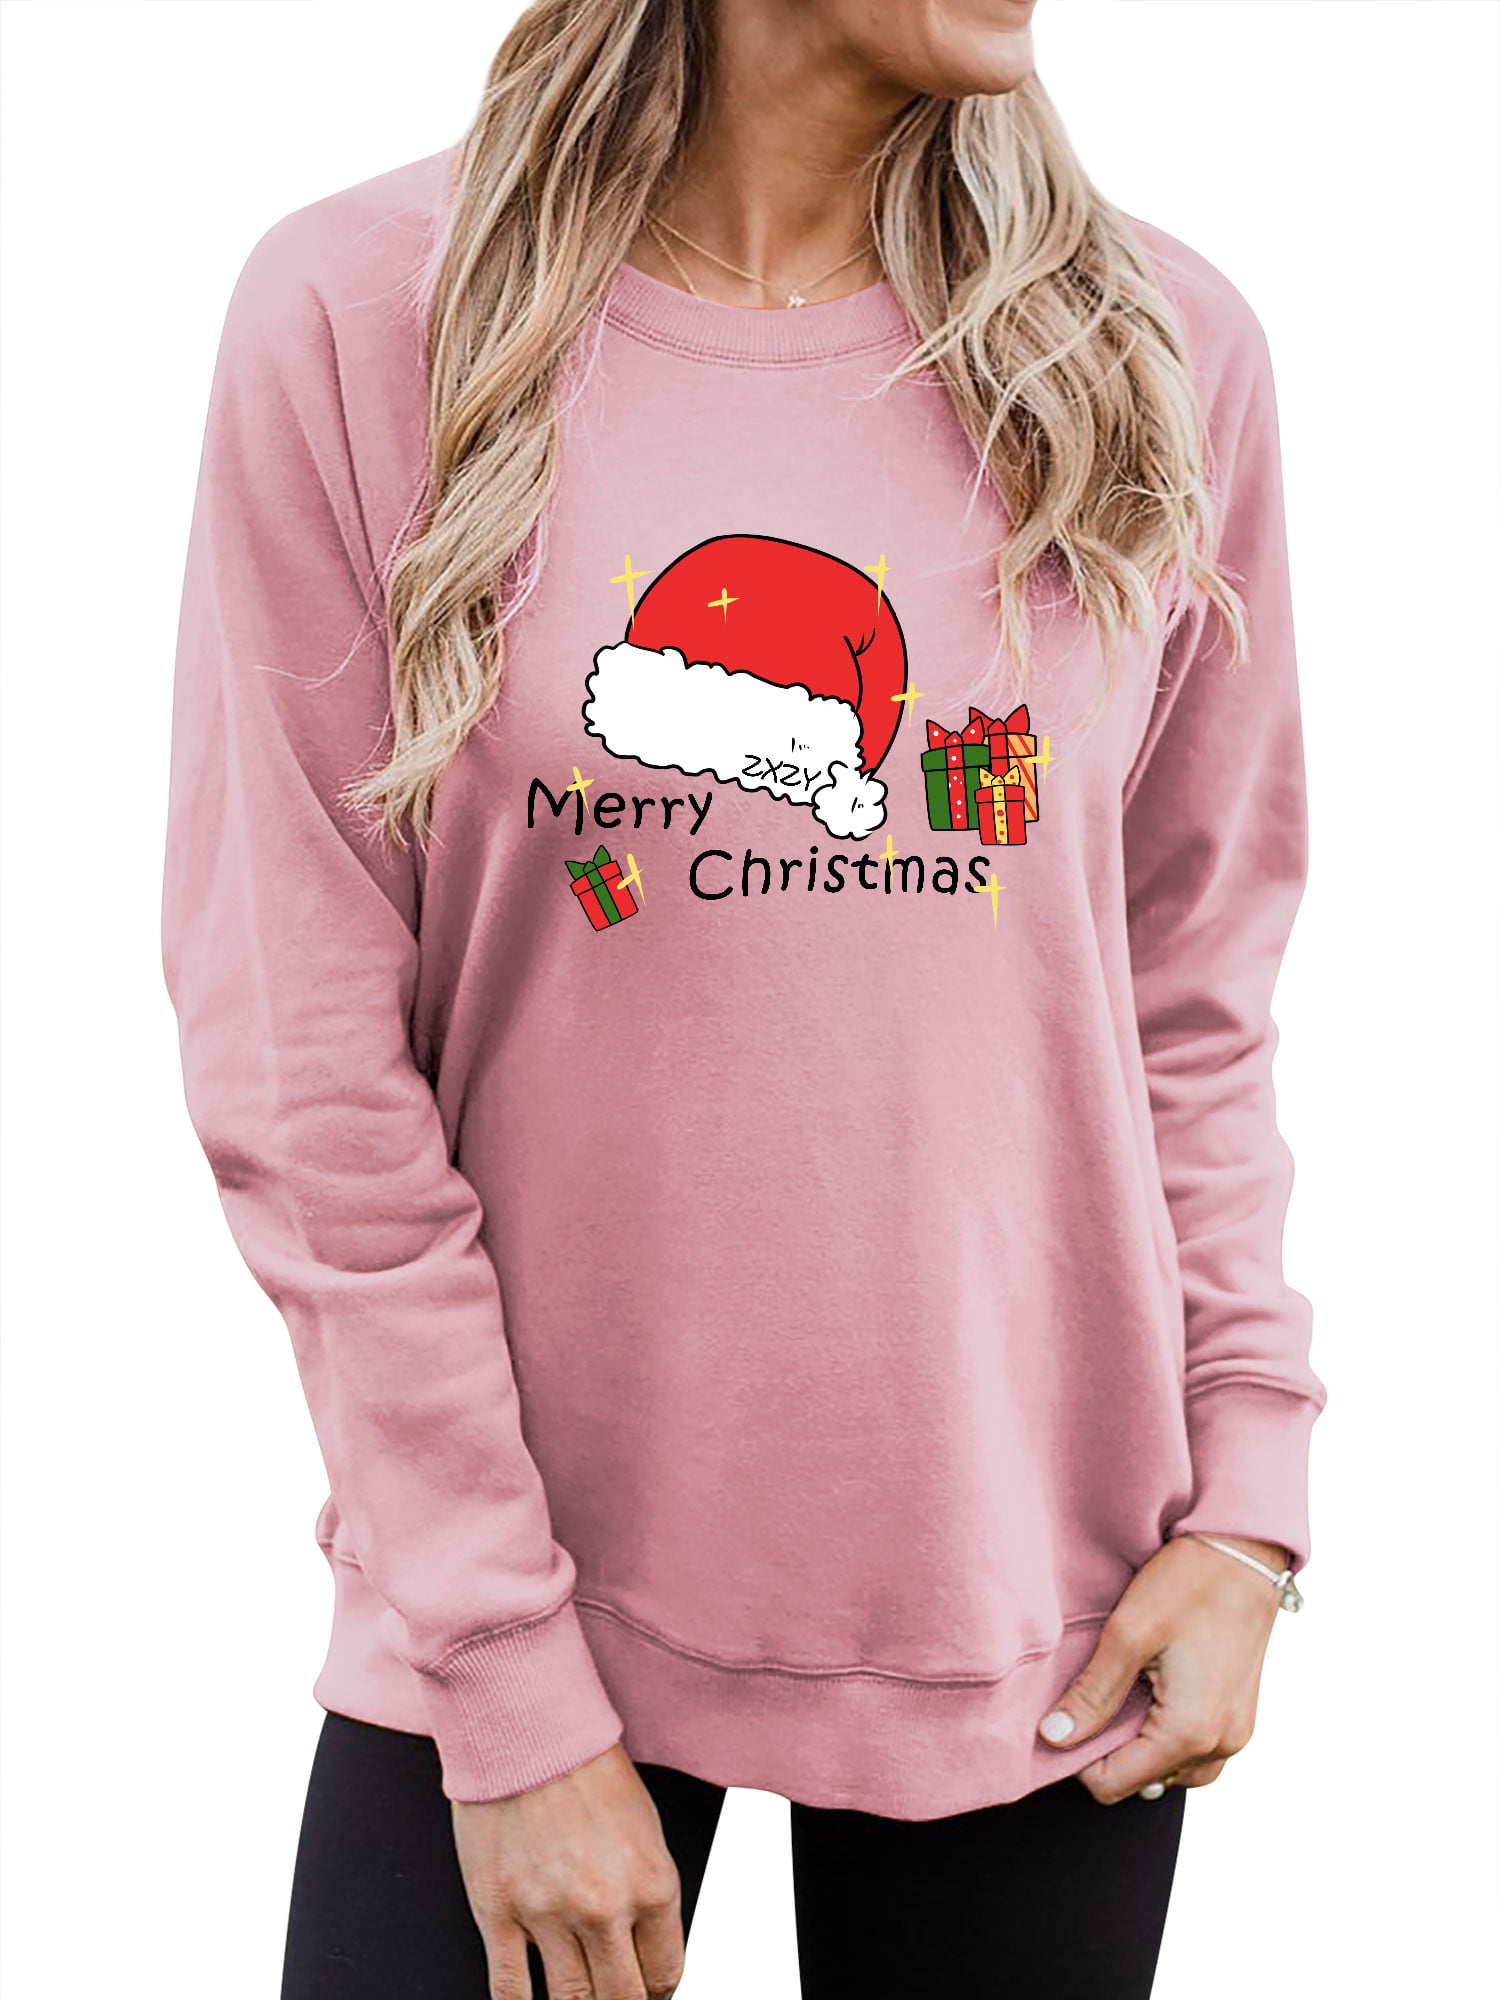 MOUTEN Womens Long Sleeve Loose Christmas Printed Casual Crew Neck Pullover Sweatshirt Top 